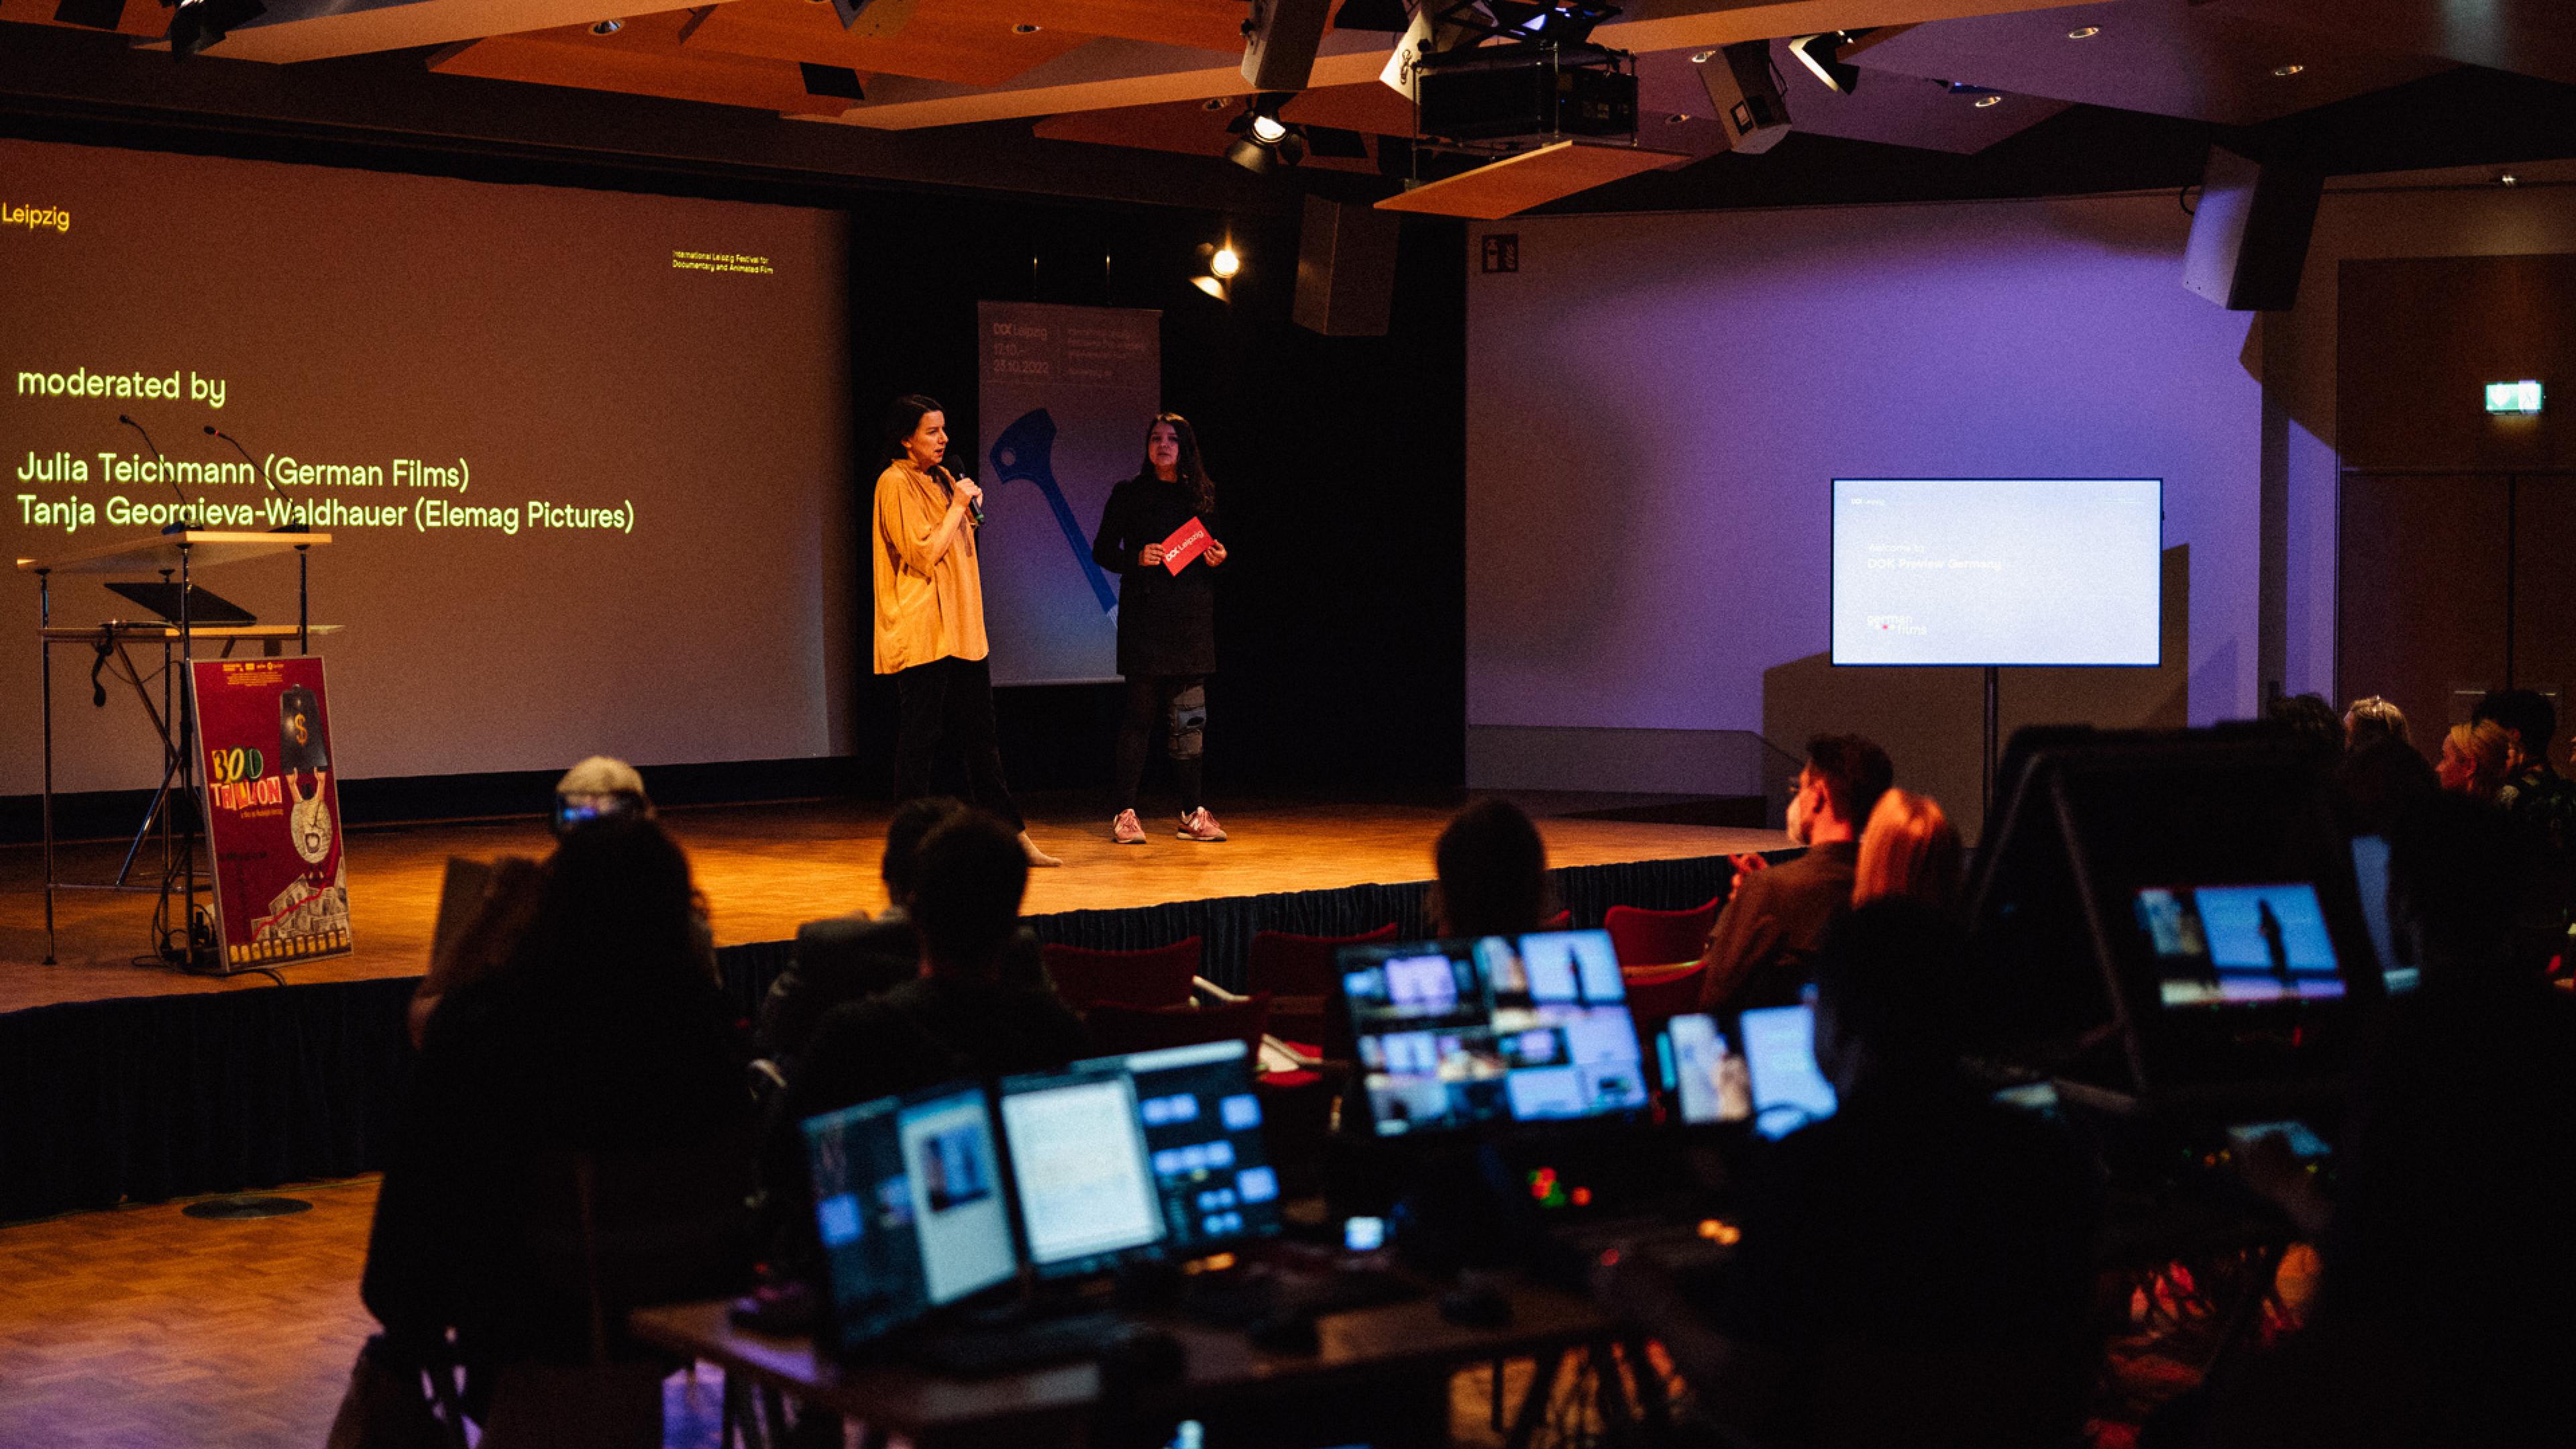 Two women are presenting on a stage in a conference room. In the middle of the audience is a live editing suite with several monitors. The monitors light up. 